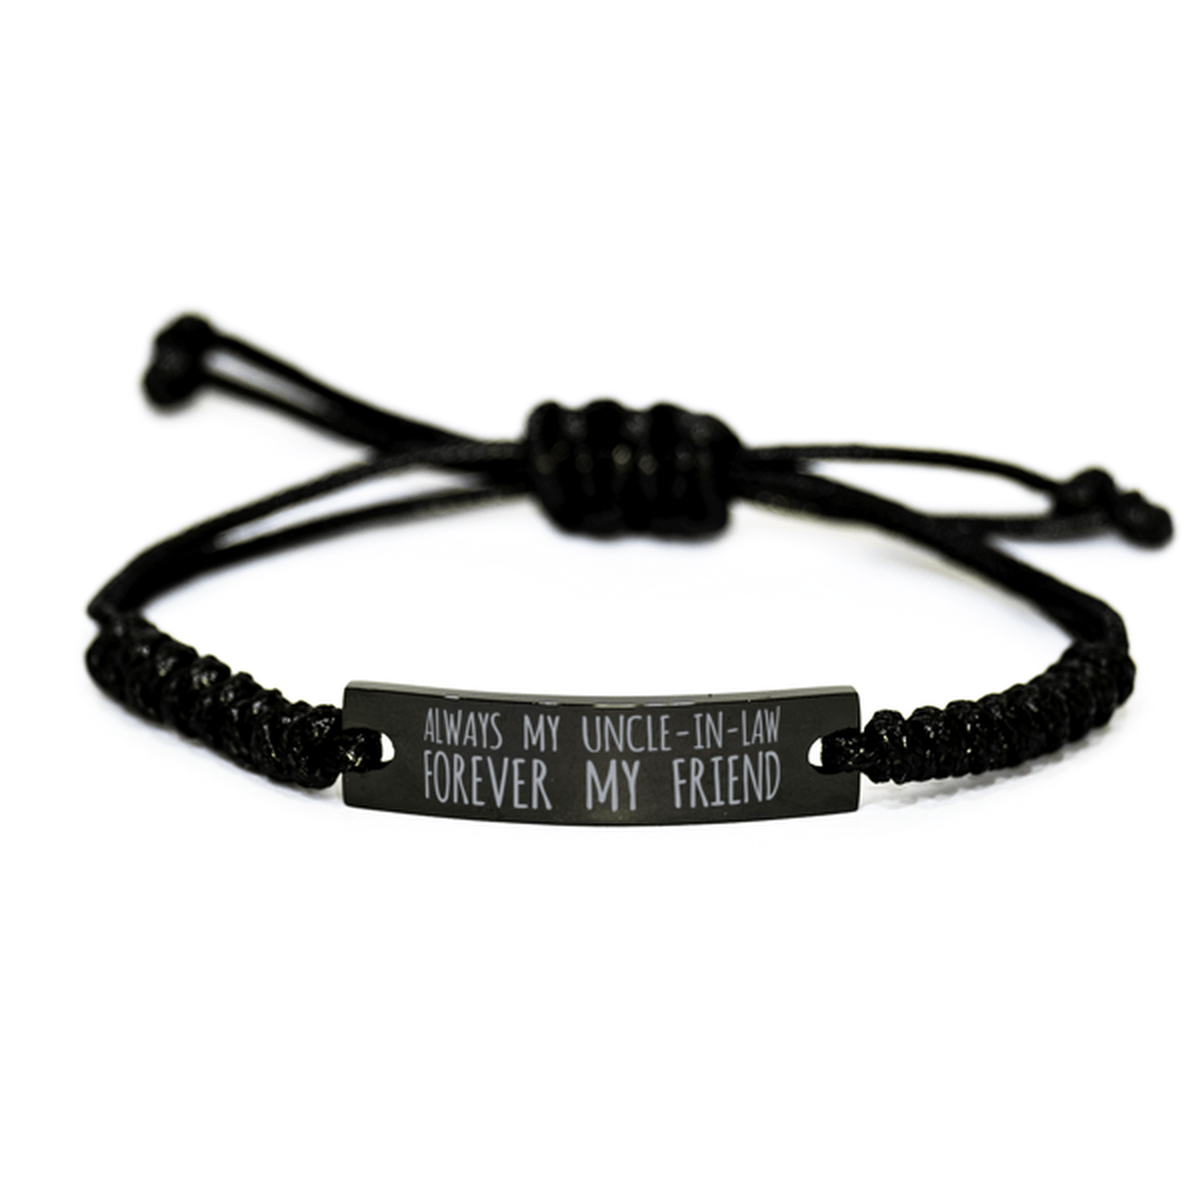 Inspirational Uncle-In-Law Black Rope Bracelet, Always My Uncle-In-Law Forever My Friend, Best Birthday Gifts For Family